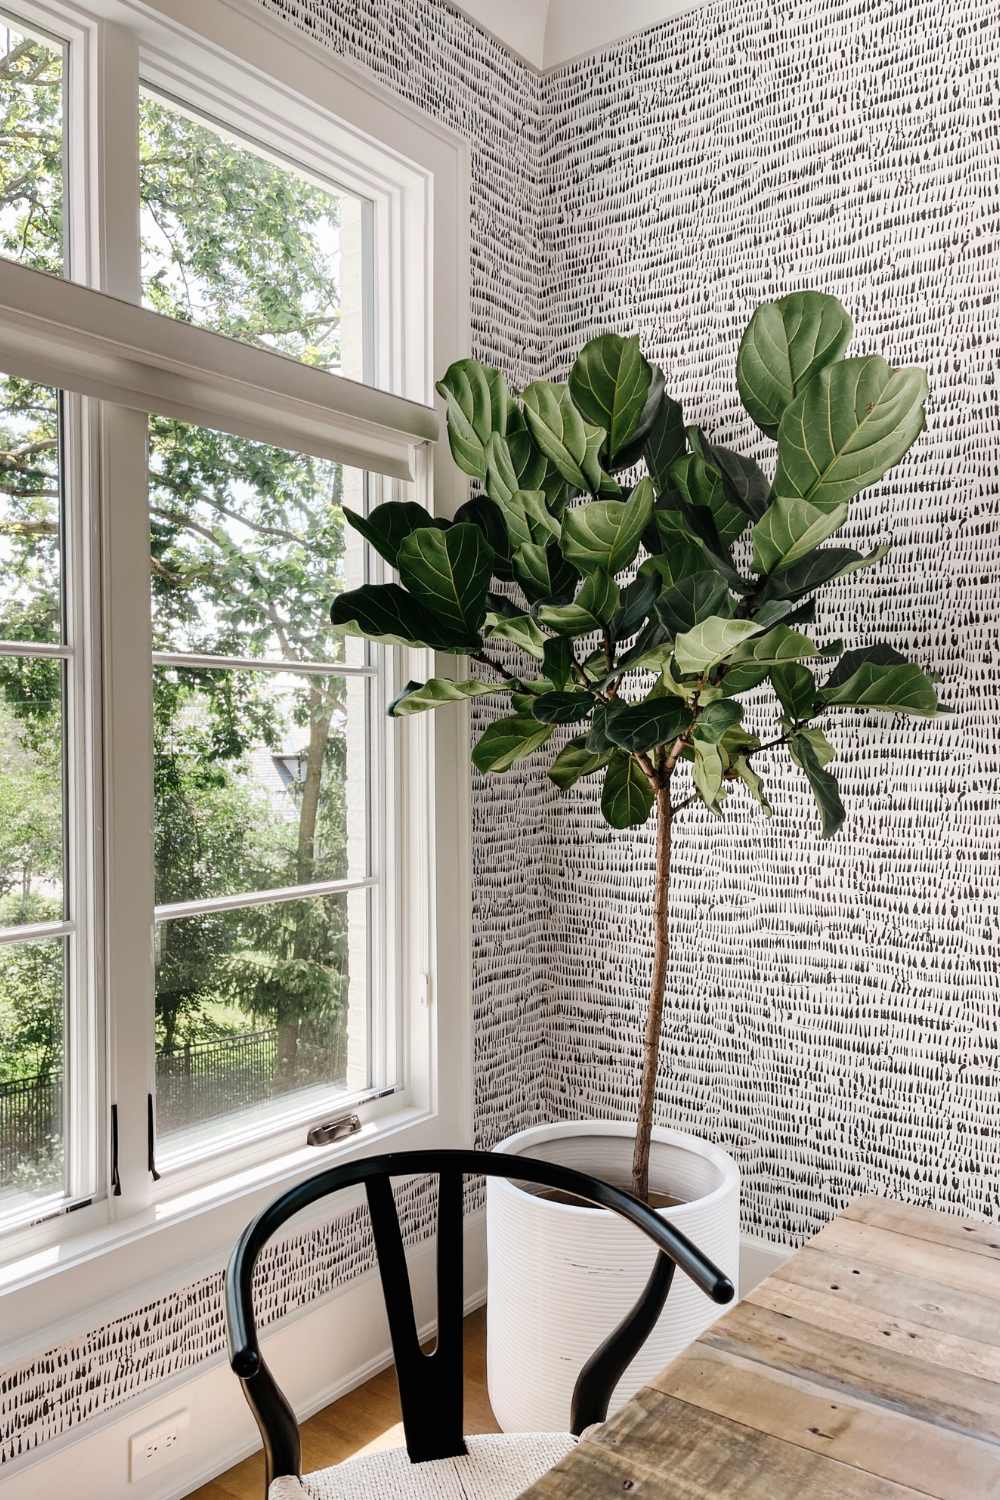 The fiddle leaf tree in the corner of the kitchen nook